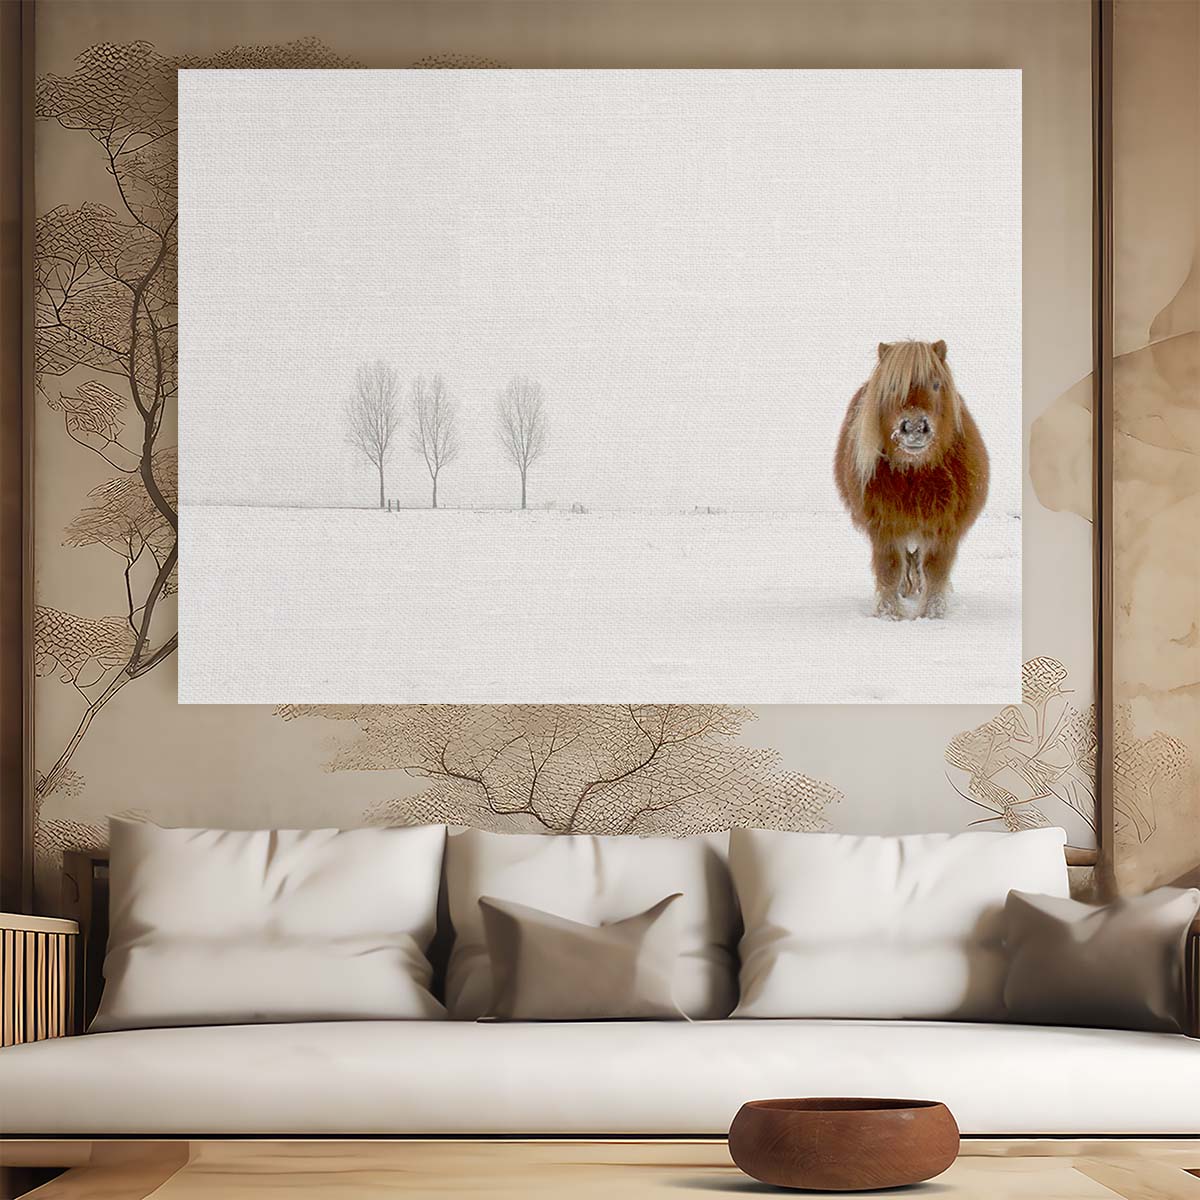 Solitary Pony in Snowy Landscape Wall Art by Luxuriance Designs. Made in USA.